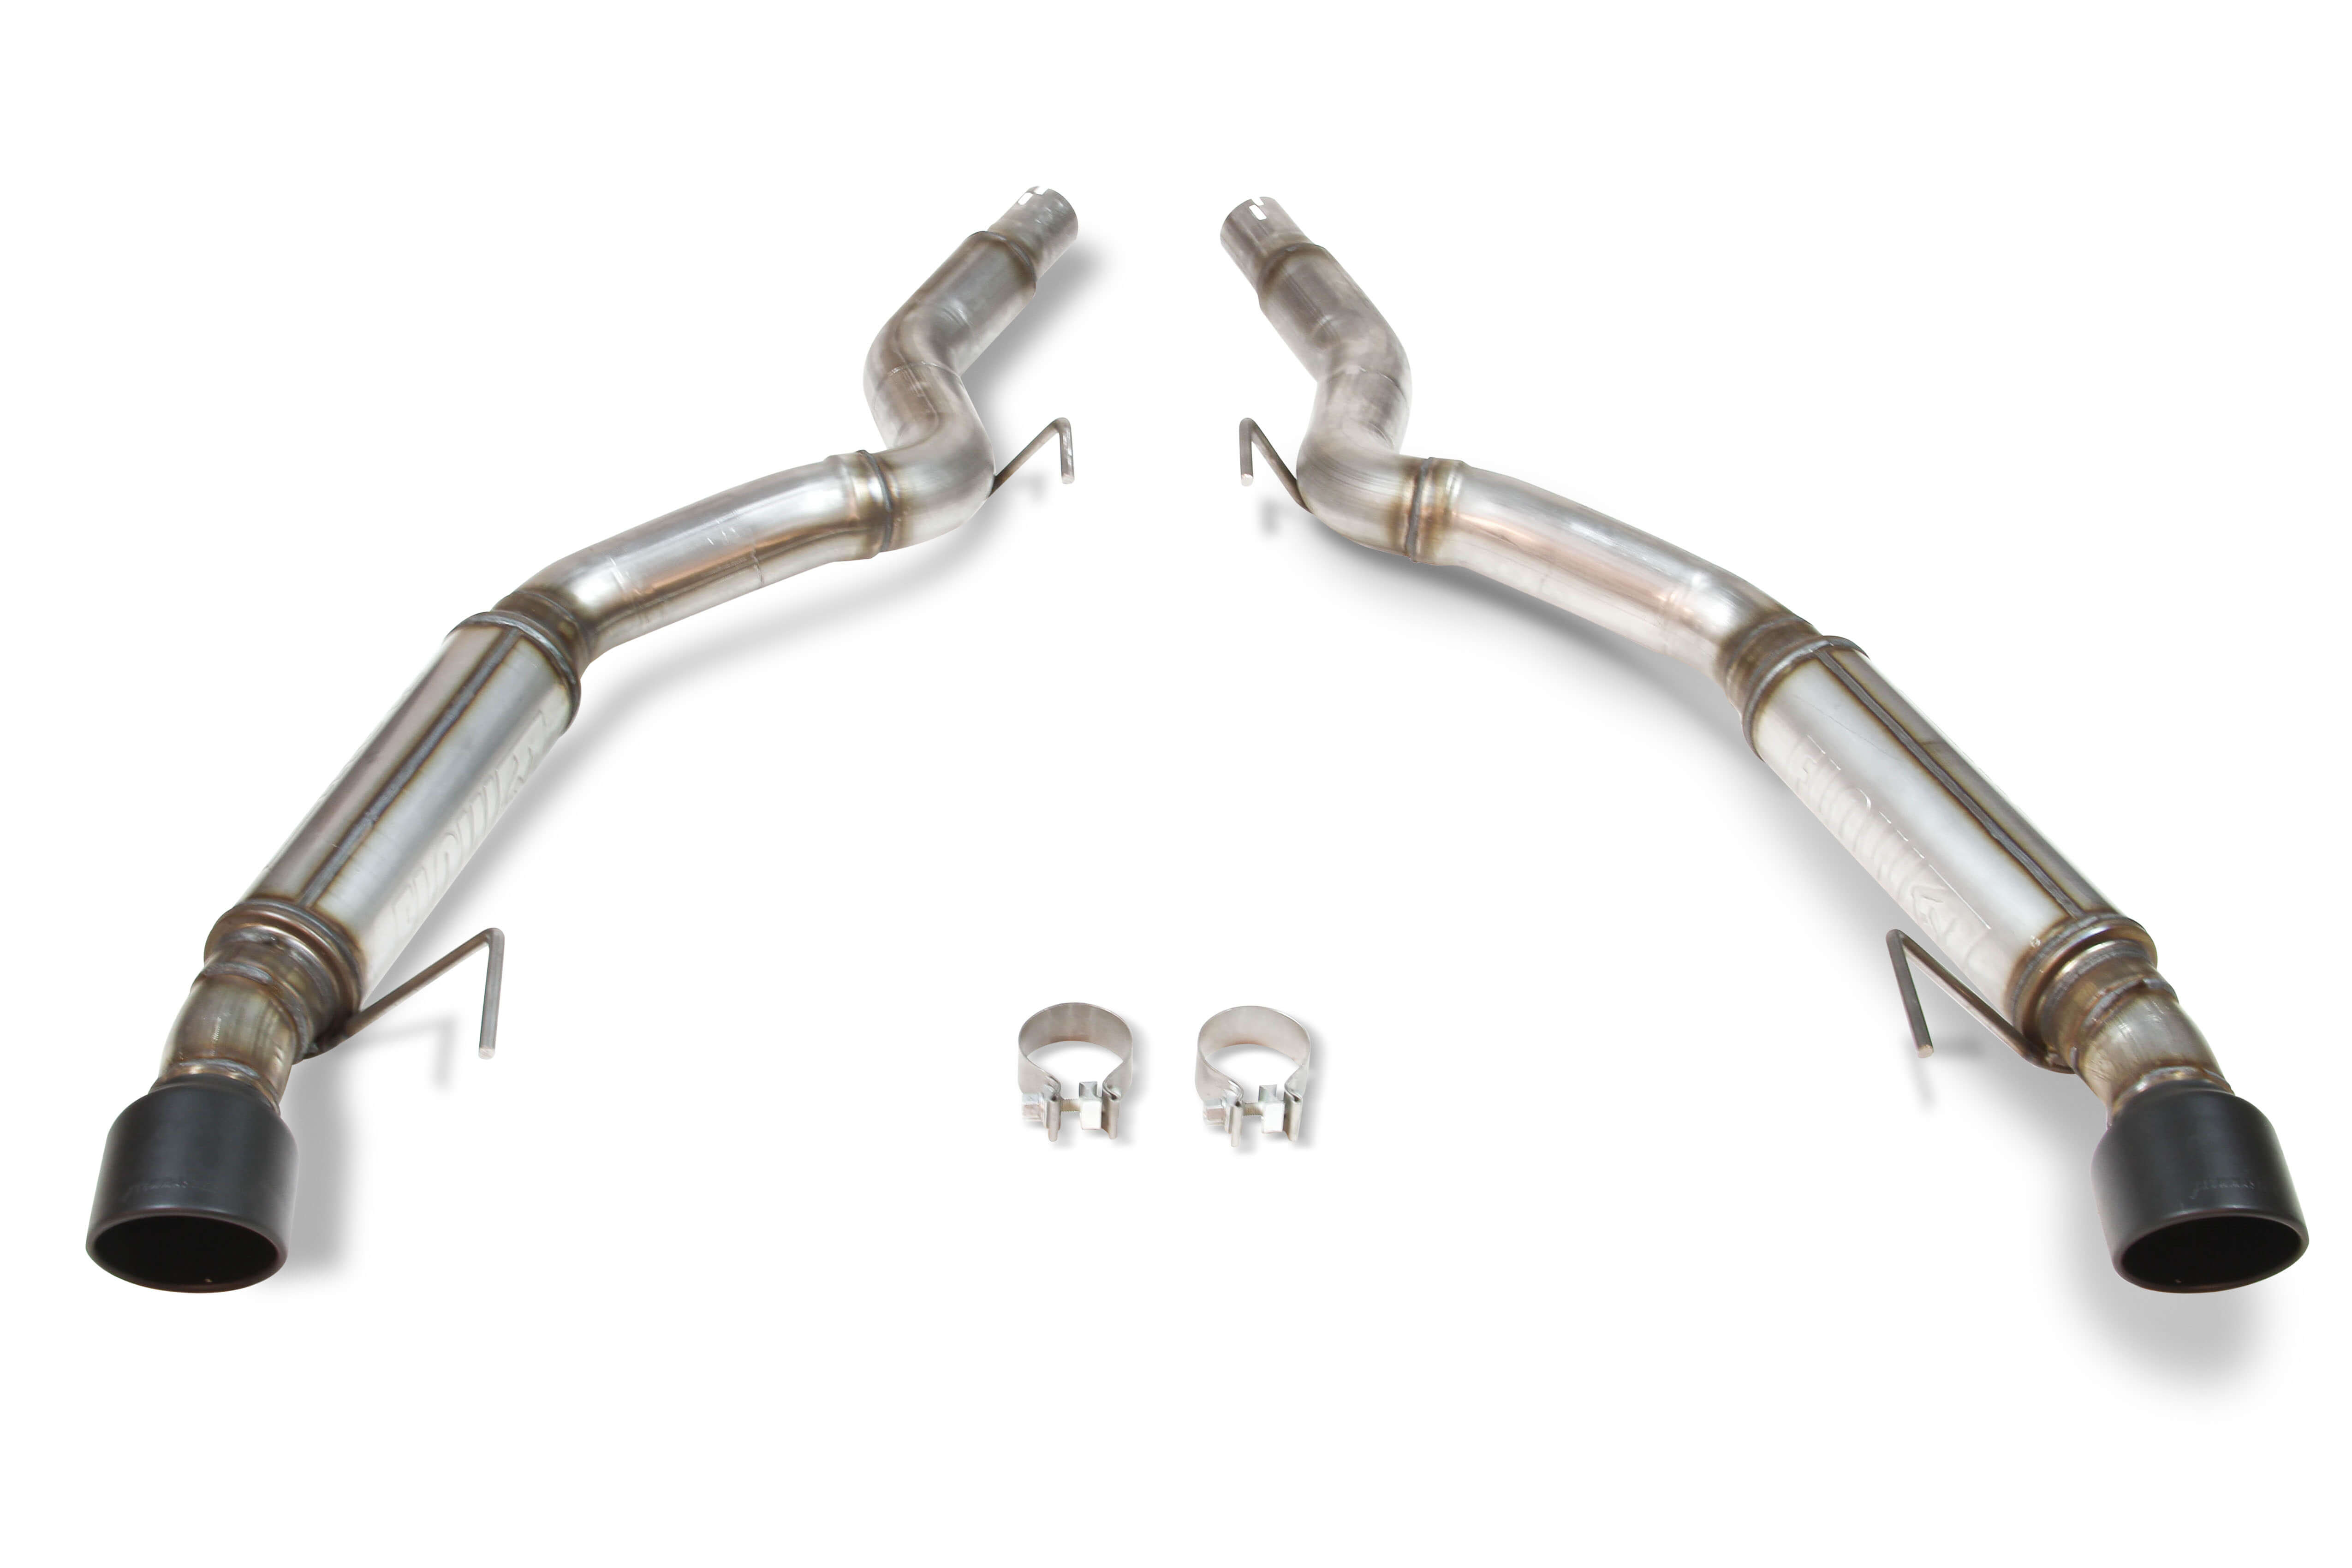 2015-2017 Ford Mustang GT 5.0L Flowmaster FlowFX Dual Exit Axle-back Exhaust Kit